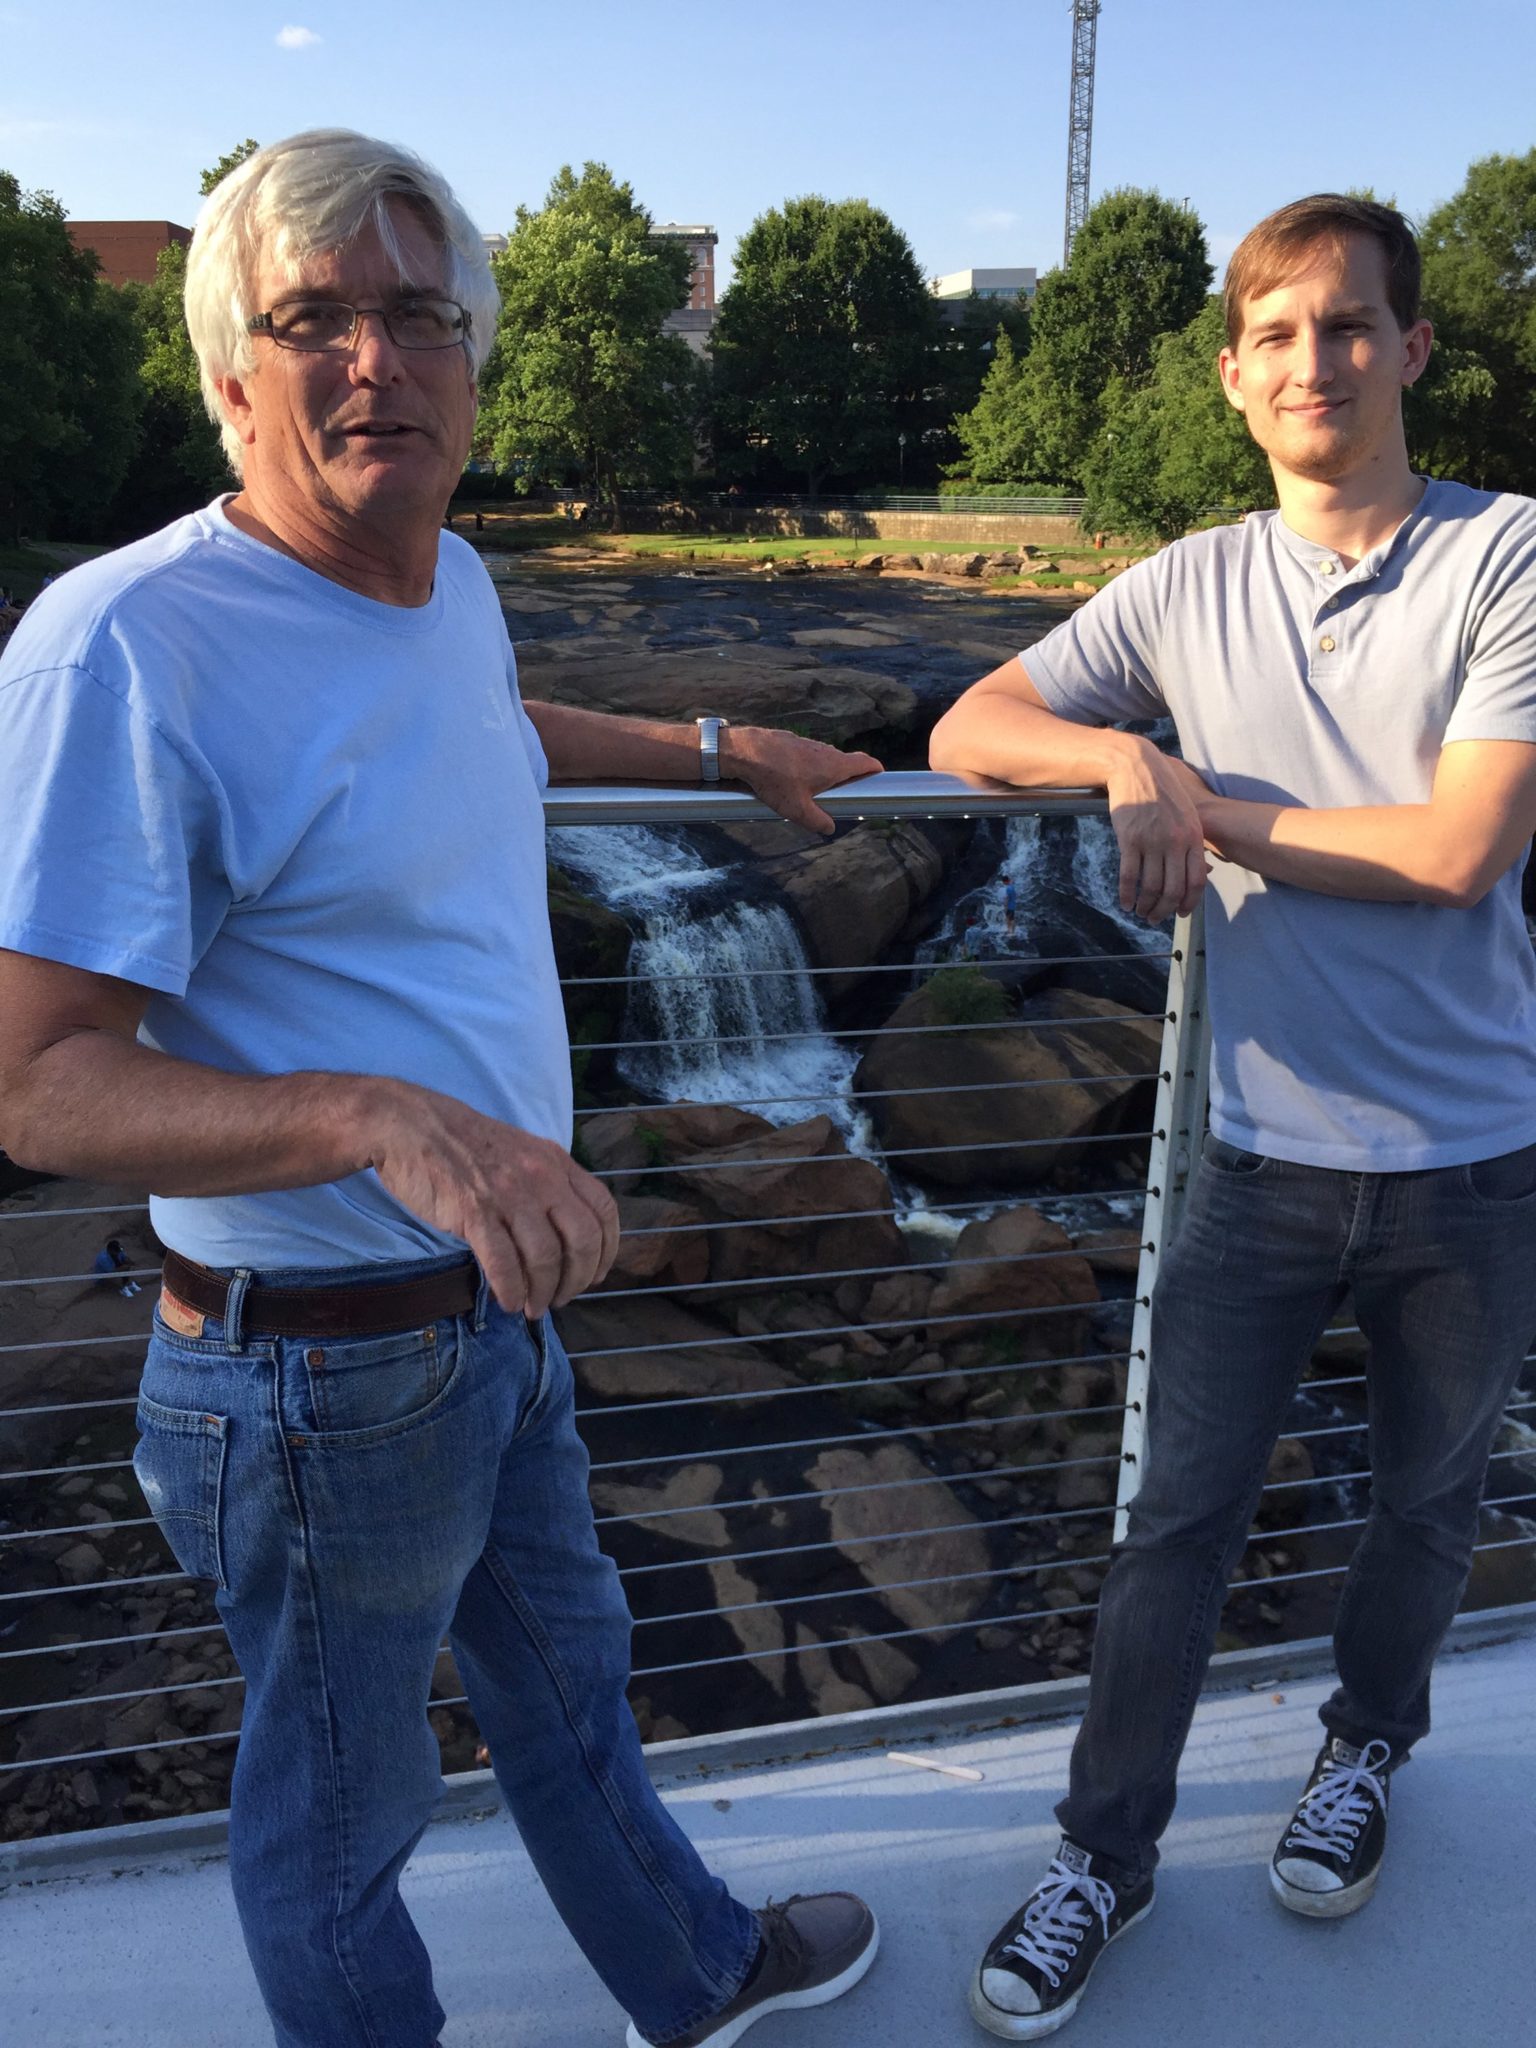 Michael and his dad at Falls Park in Greenville, SC